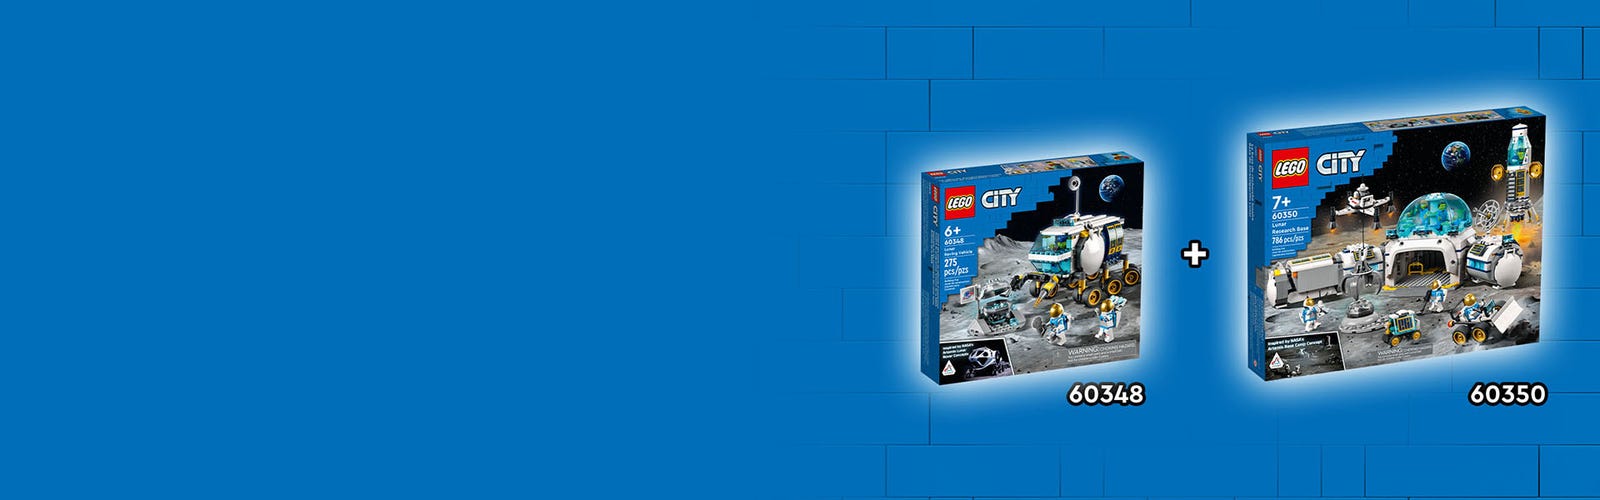 LEGO City Space Port Lunar Research Base 60350 by LEGO Systems Inc